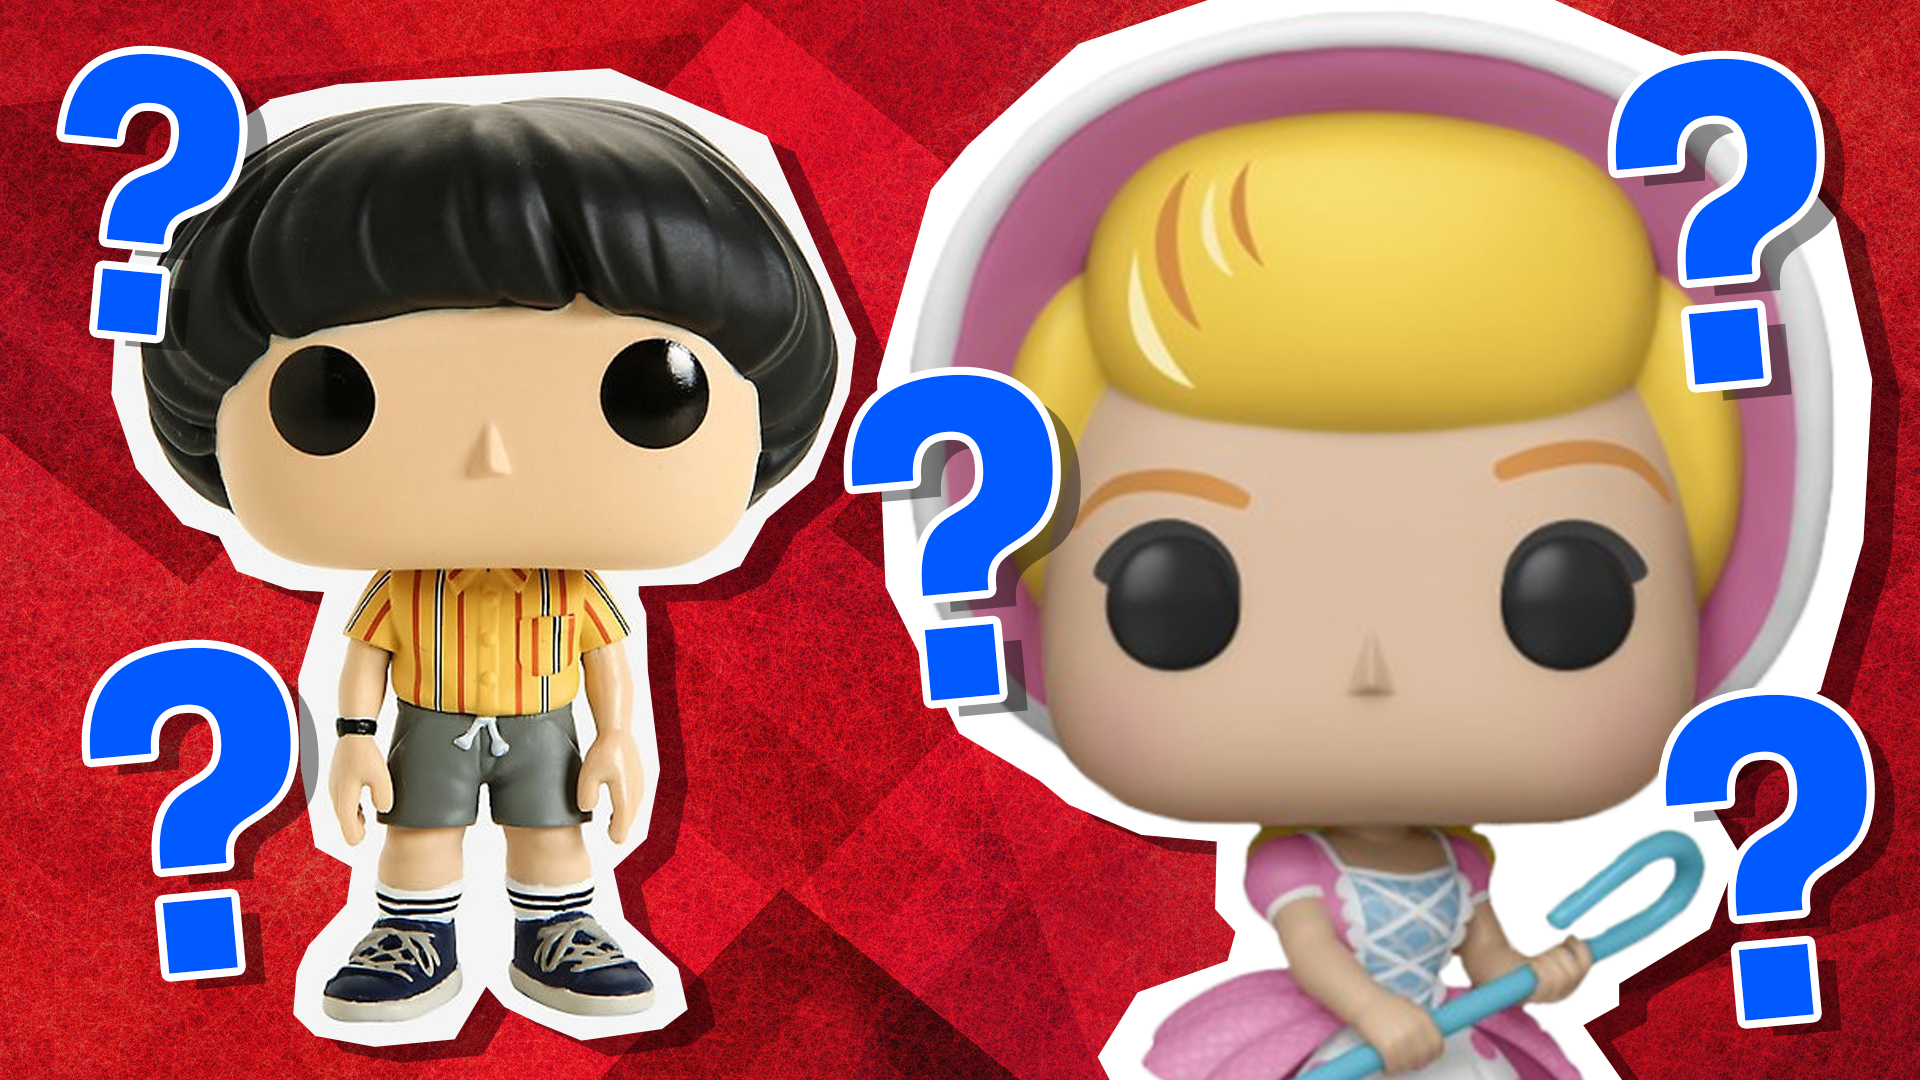 A Stranger Things and Toy Story Funko Pop vinyl figure